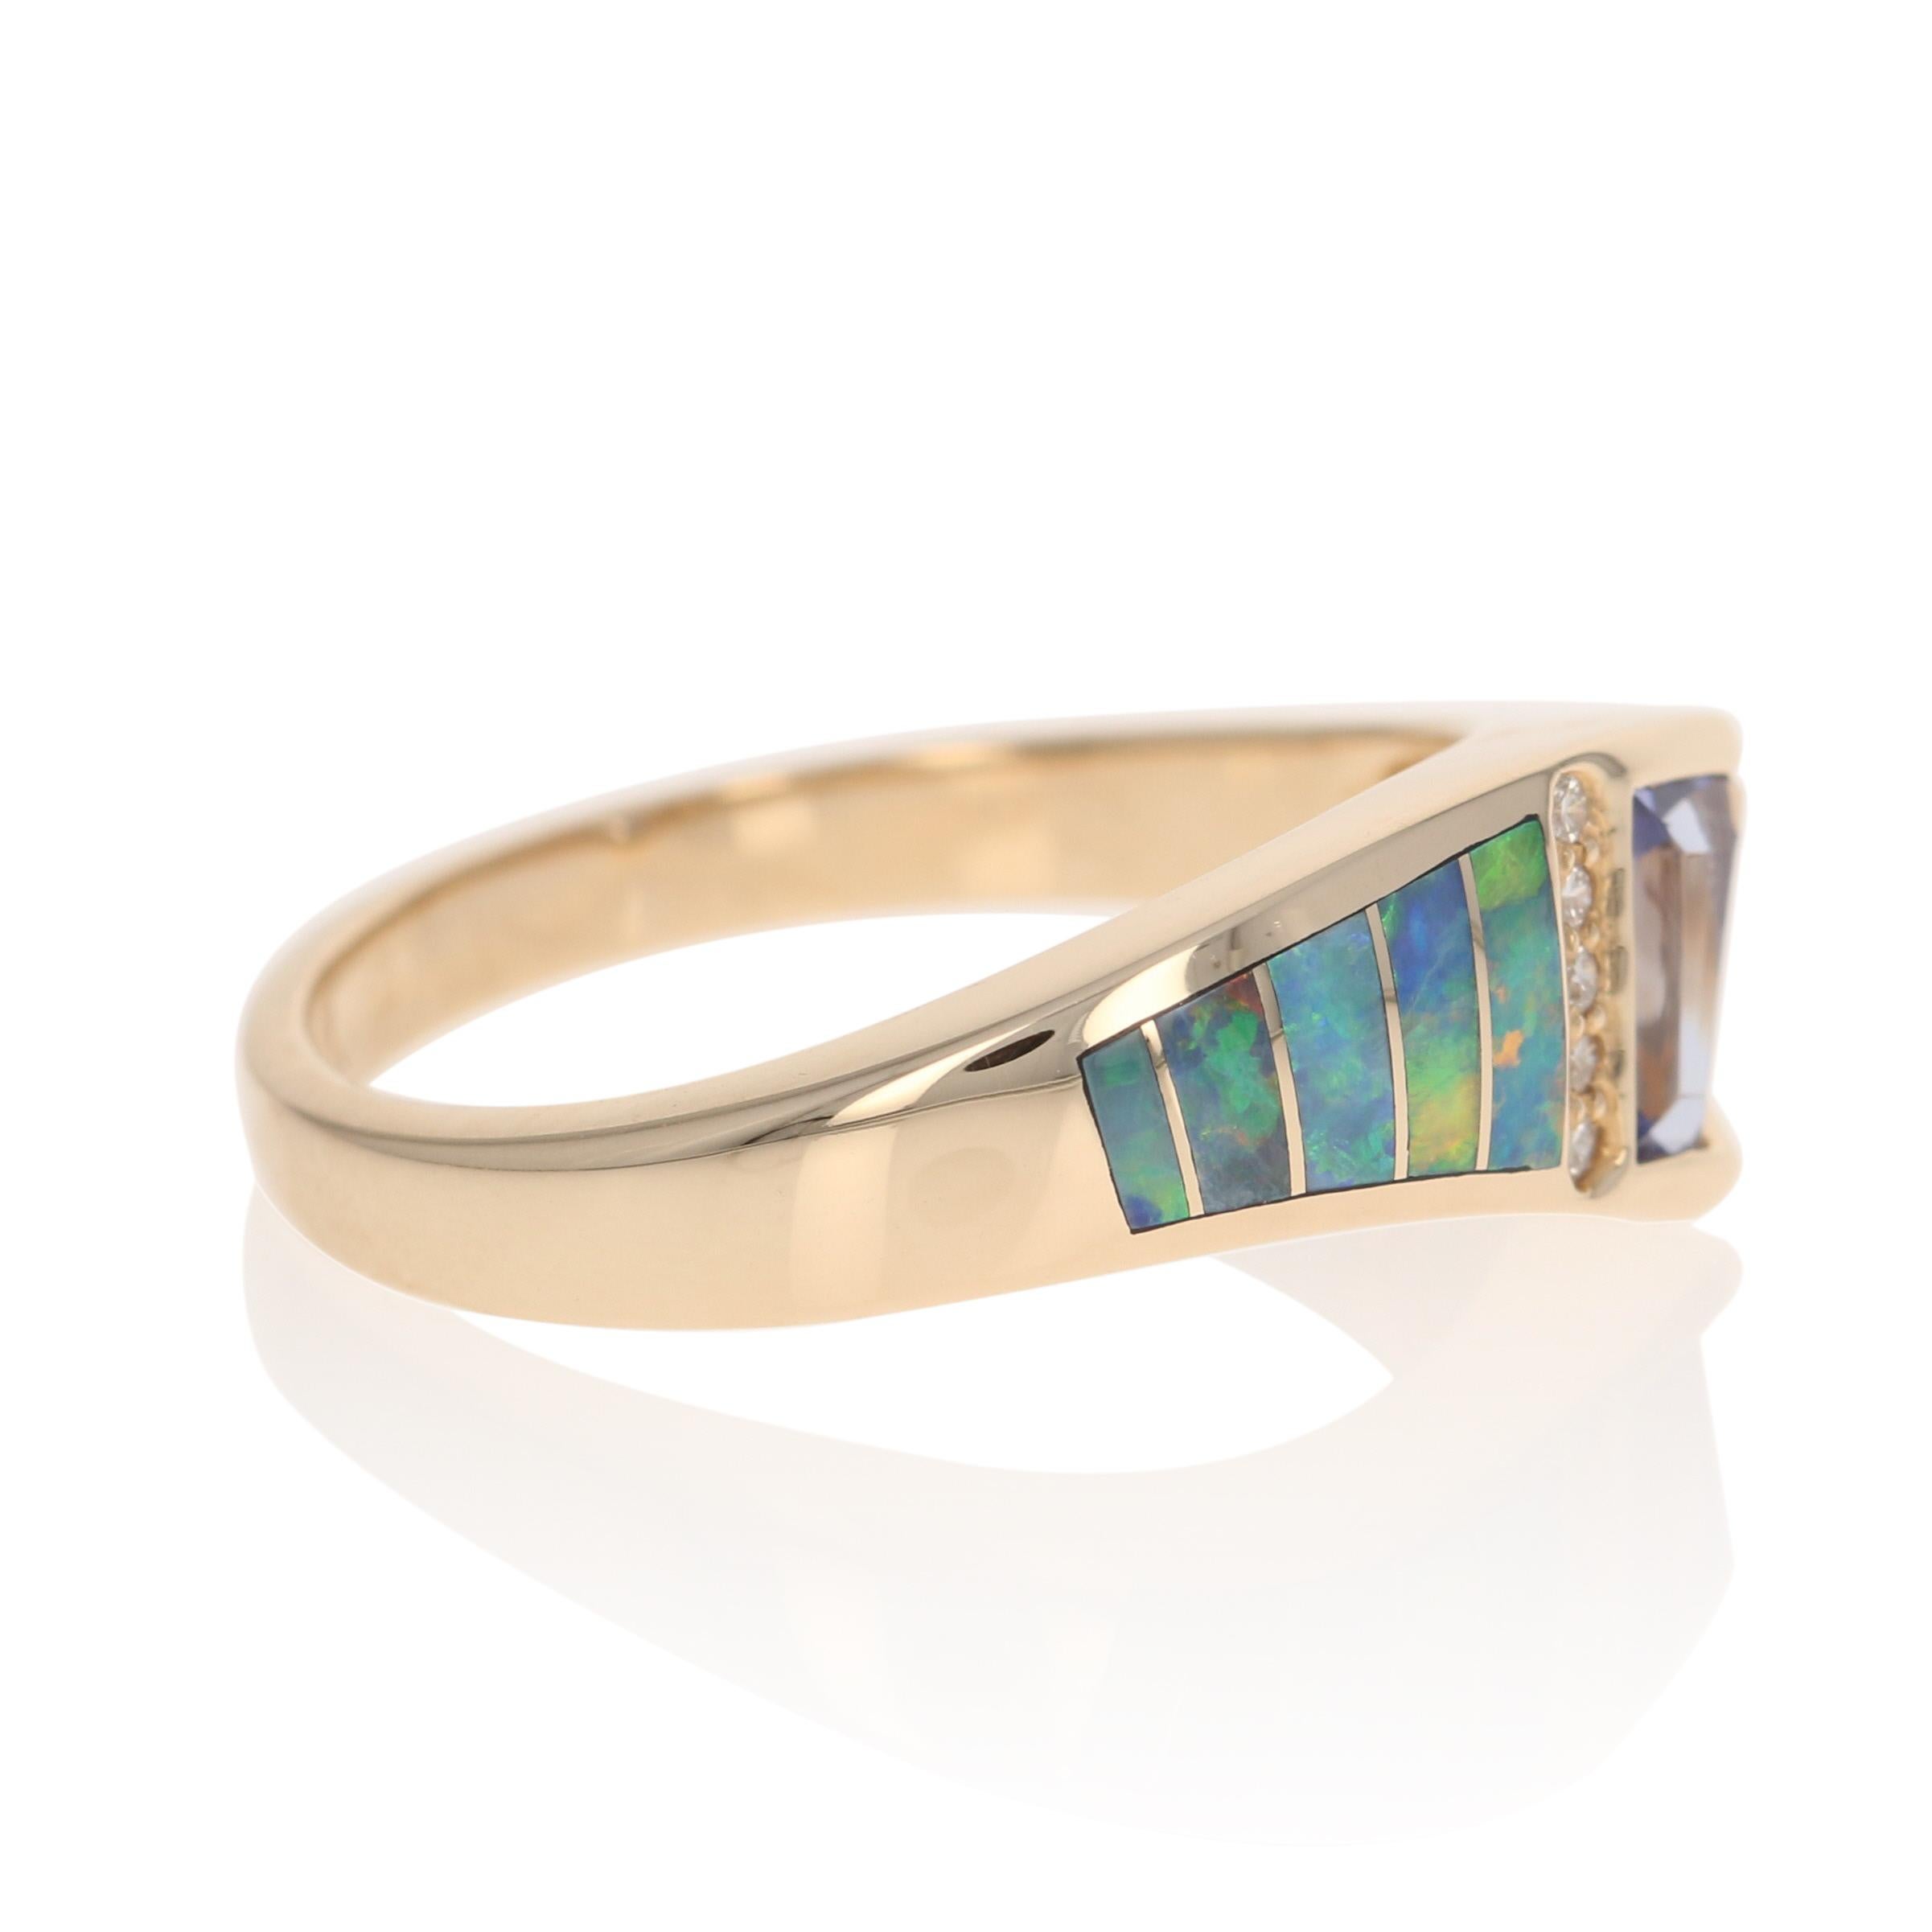 The quintessential blend of elegance and style, this gorgeous Kabana ring would make a great addition to your own collection or a fabulous gift for a friend. This NEW piece is fashioned in 14k yellow gold and features a modified bypass-style band